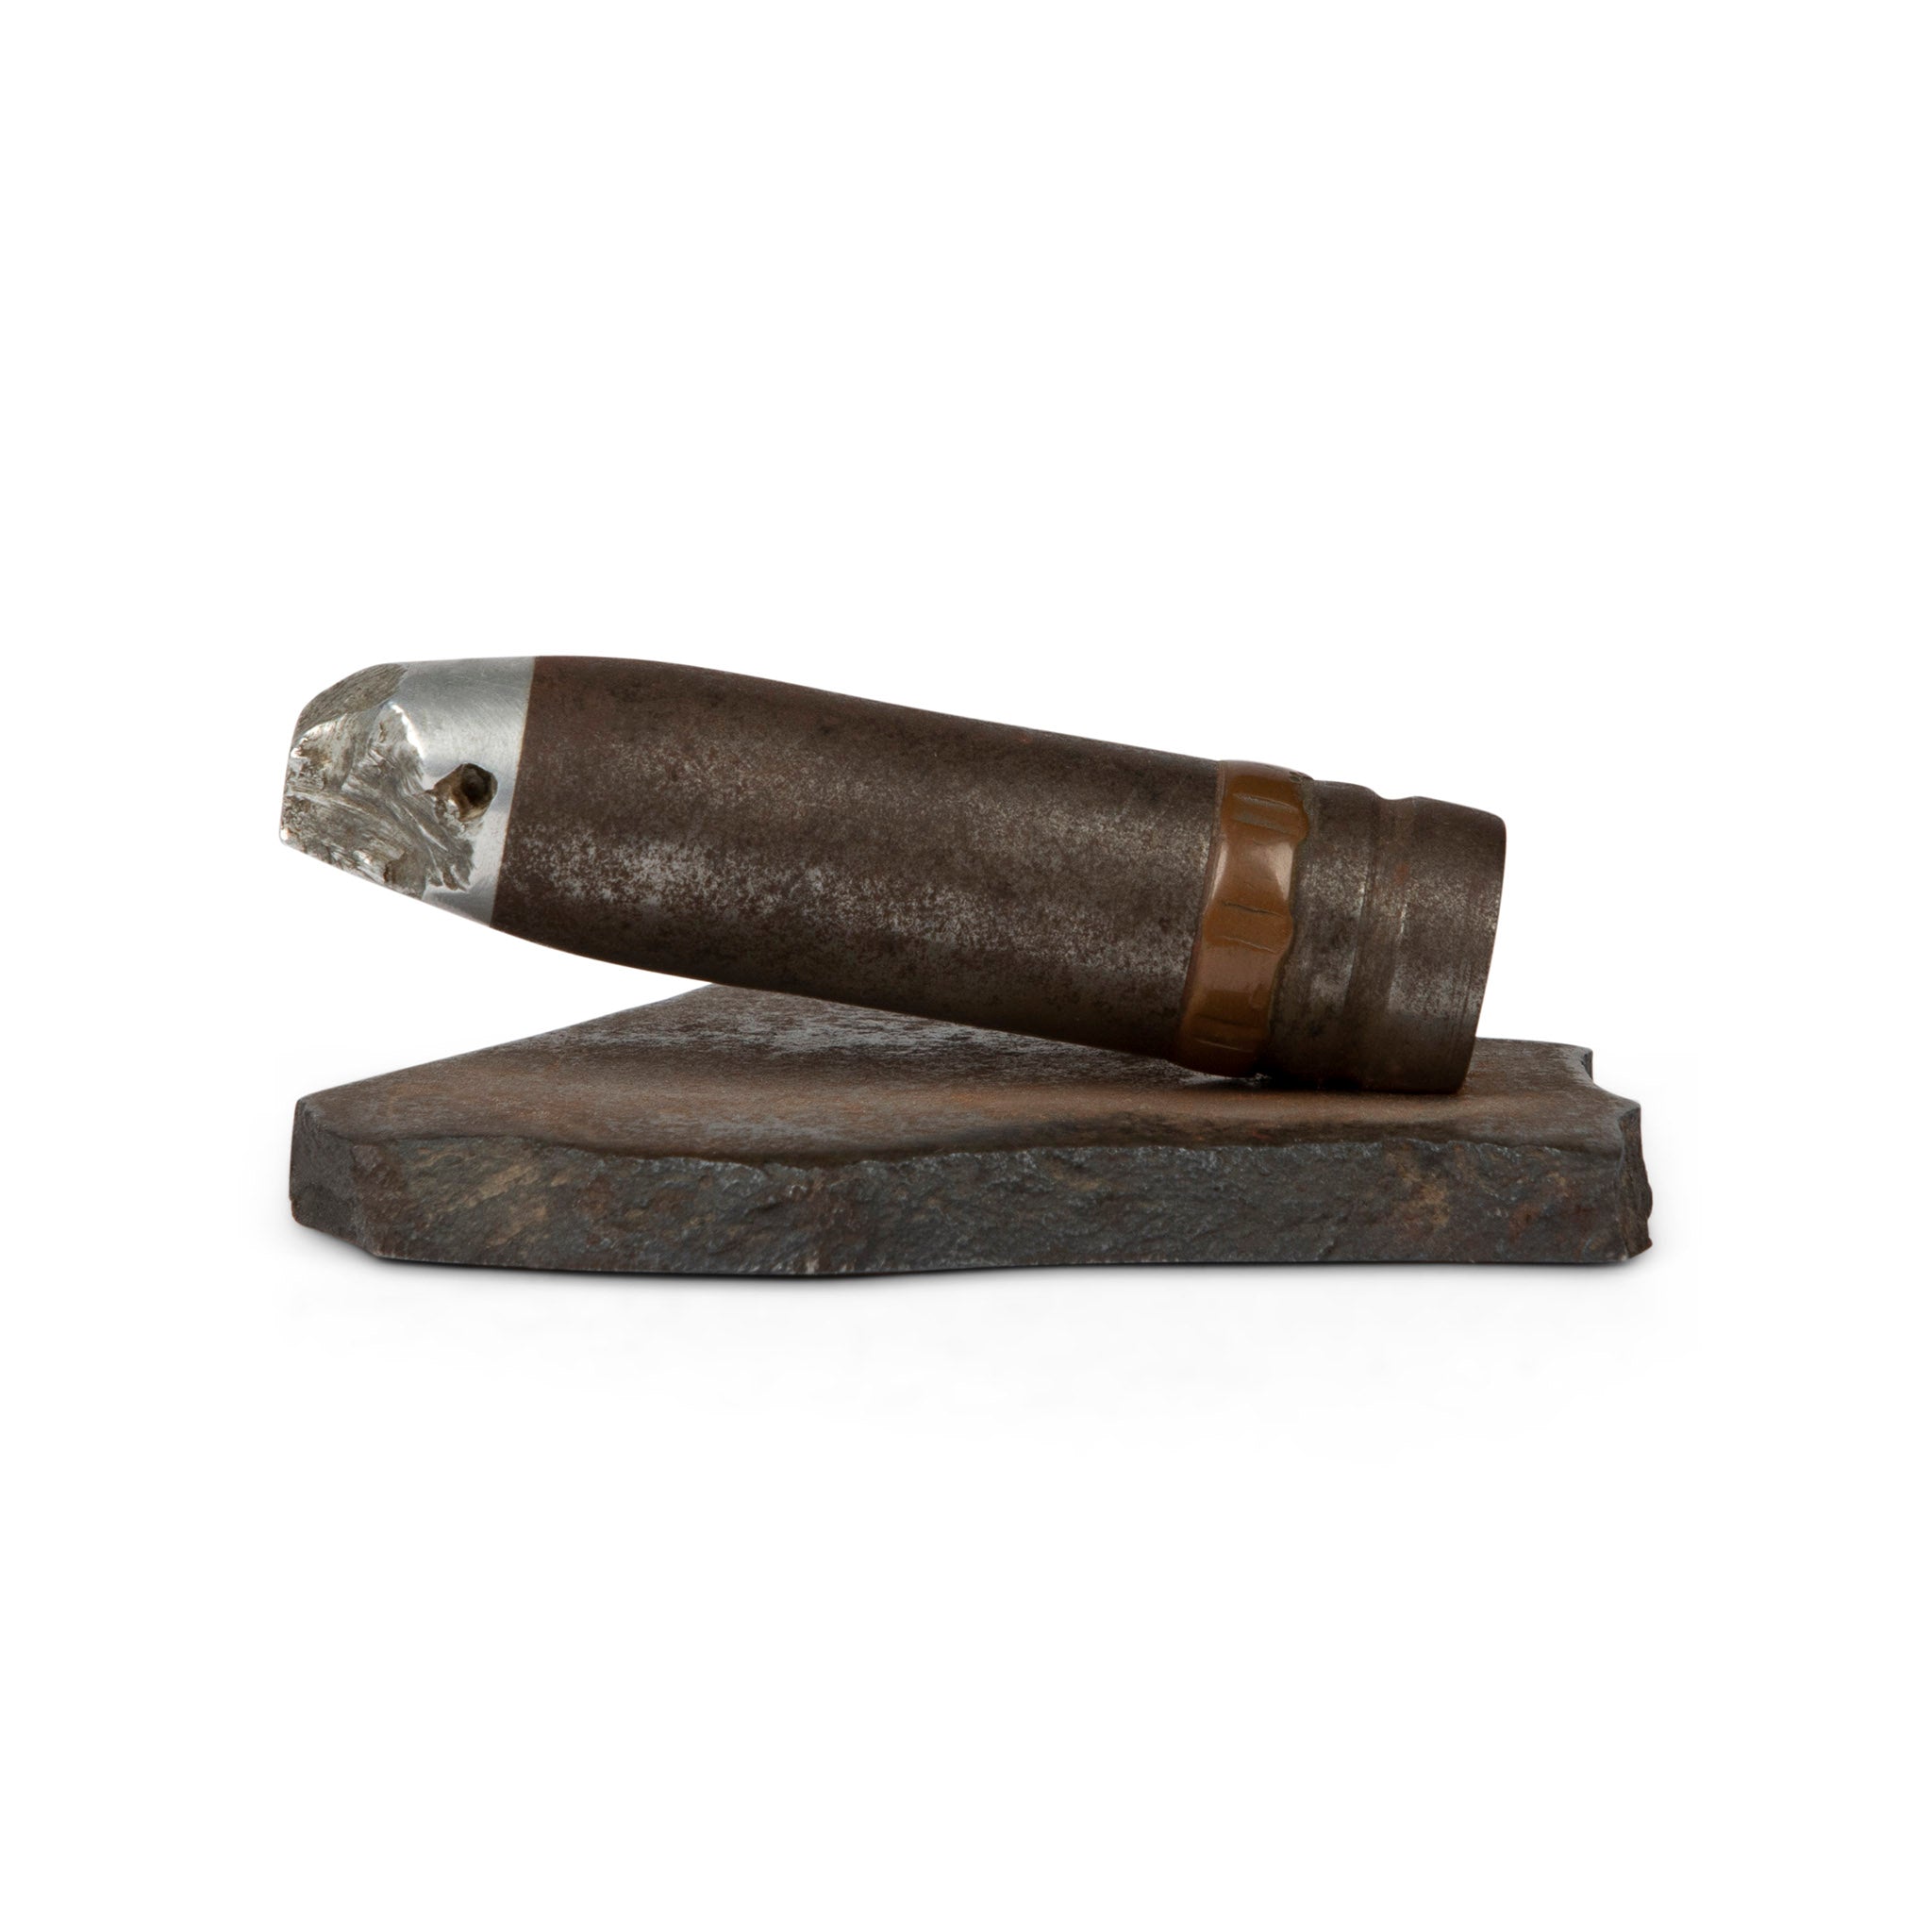 Trench Art Steel Cigar Paperweight